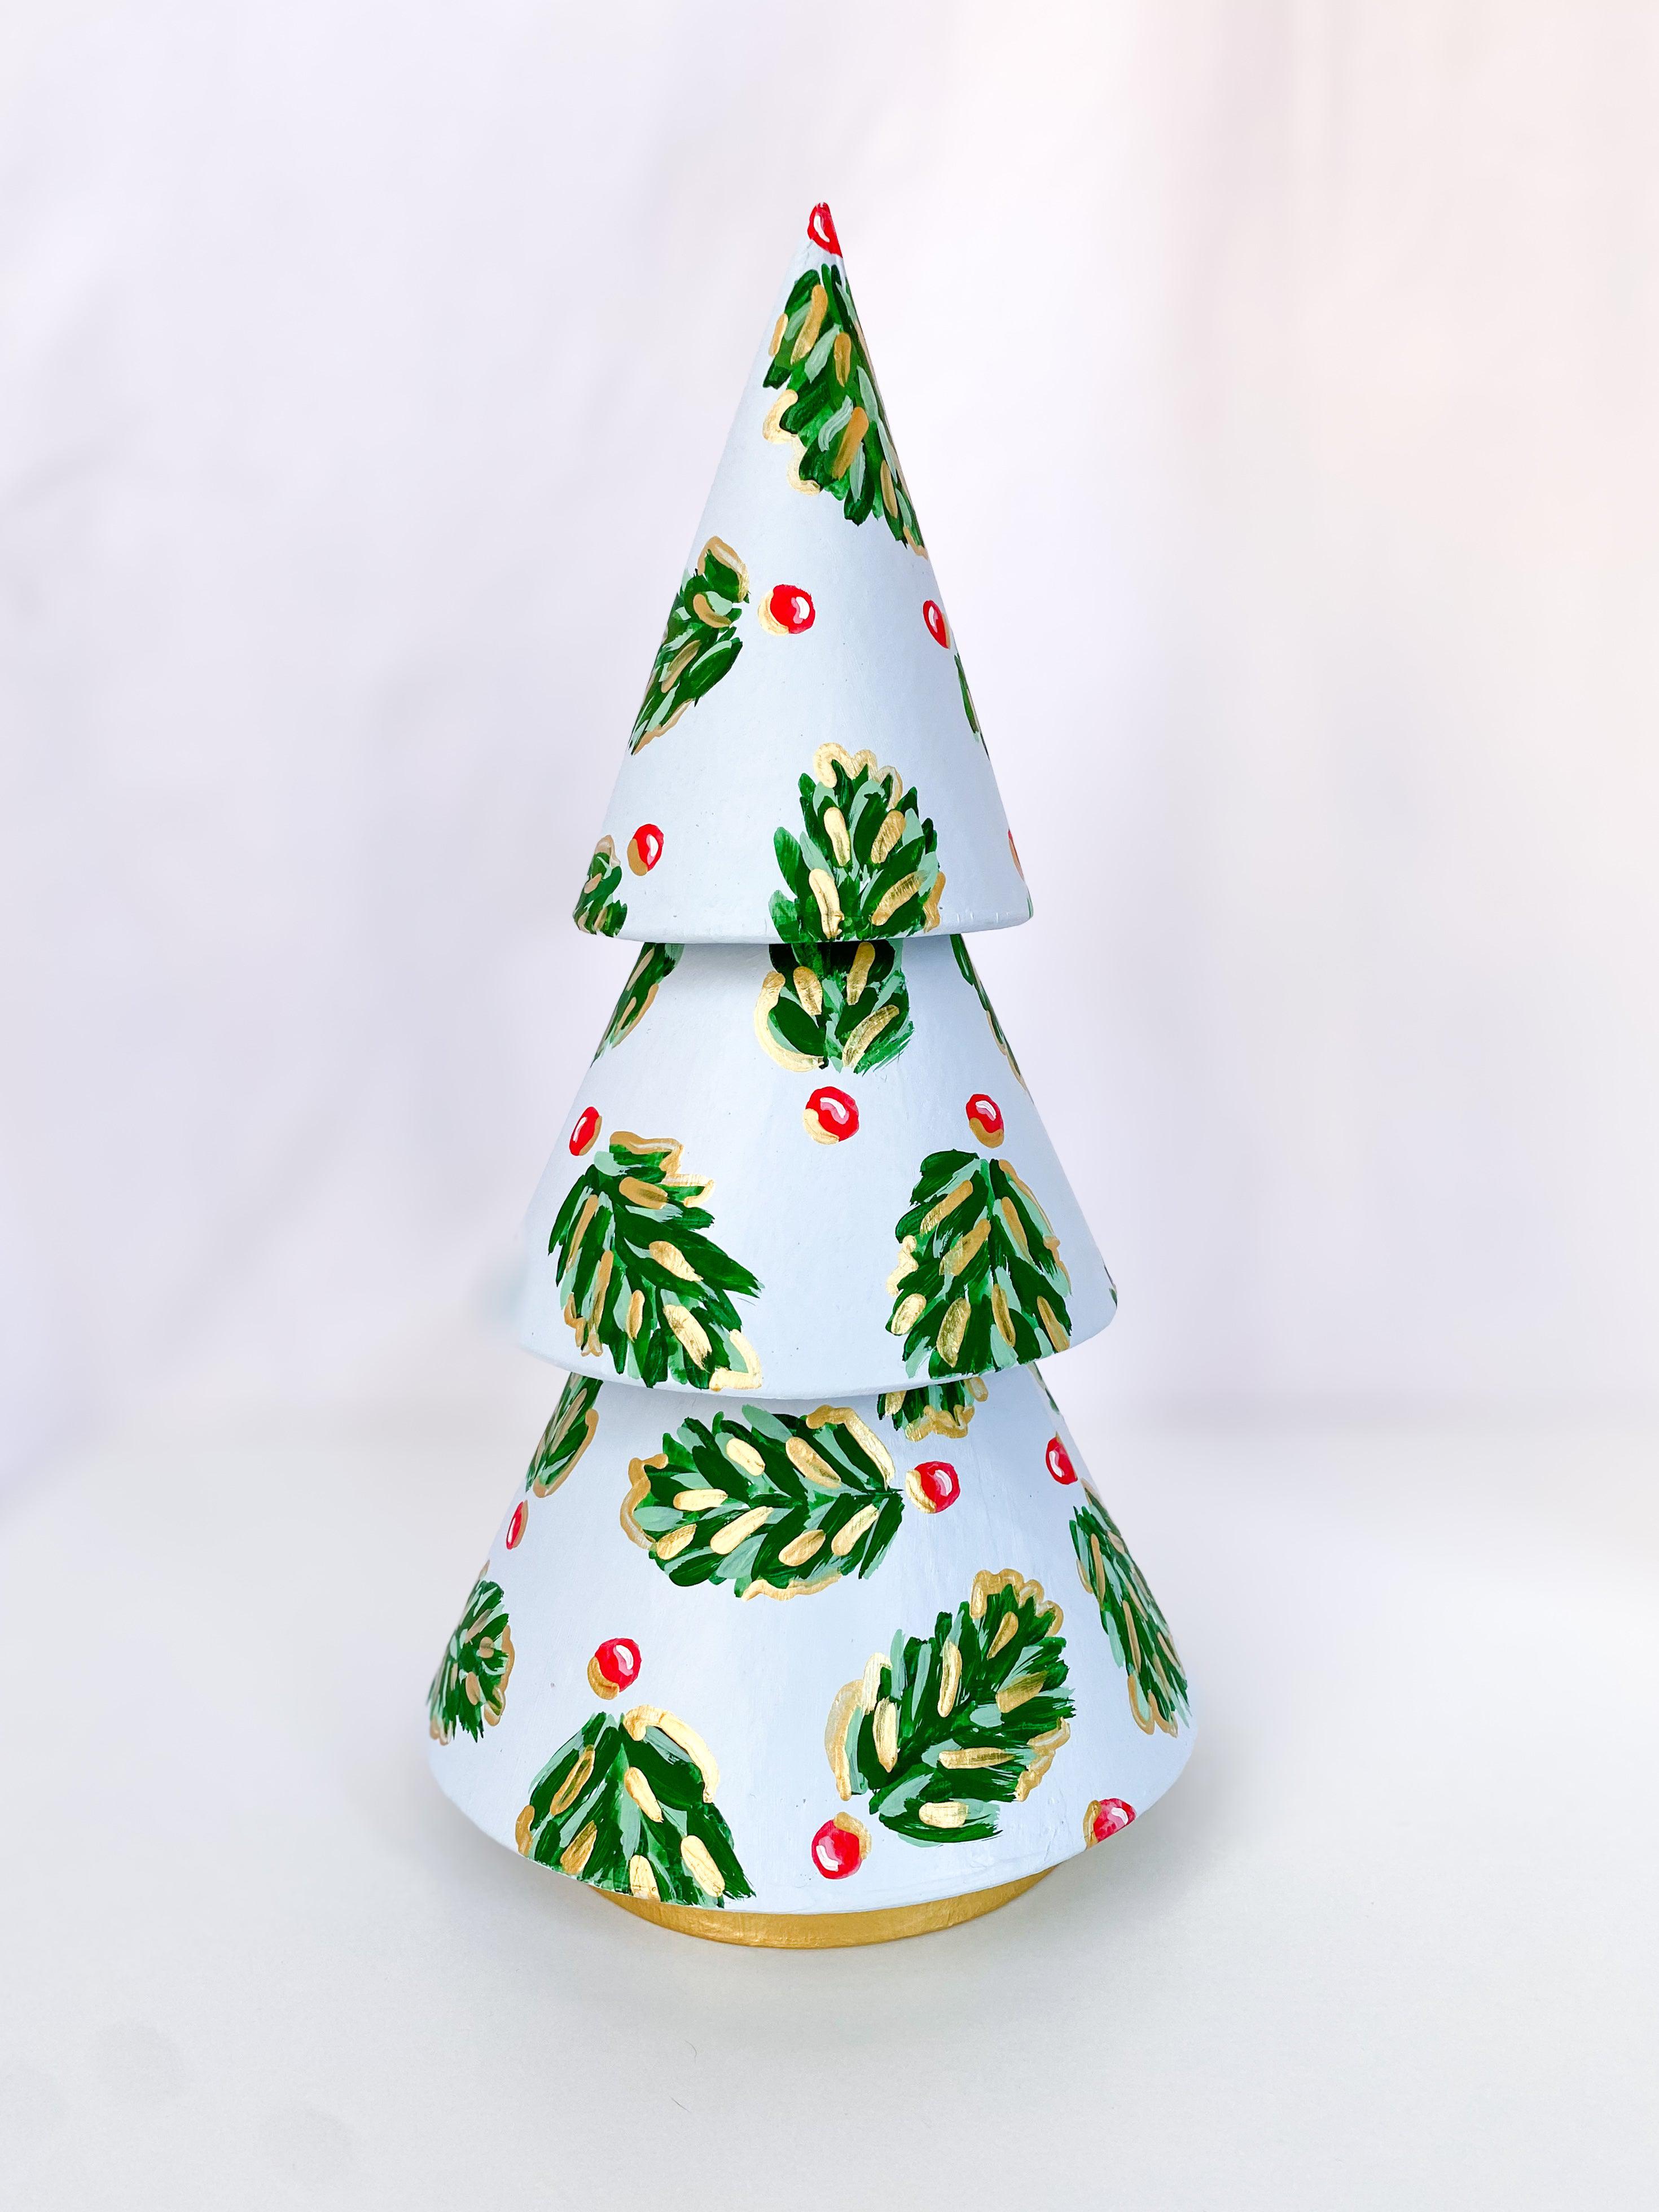 Icy Blue Golden Holly Mini Tree - Tall-Hand-Painted Mini Christmas Tree | Measures 12" tall and approx. 6" wide | Features the Golden Holly design with a light blue base and shimmery gold accents and gold trunk | Light-weight and non-breakable paper mache tree | Coated with a protective matte finish that will keep it shimmering year after year | Each tree is slightly different with potential small imperfections due to the hand-painted nature, making each one special and unique!-The Singing Little Bird